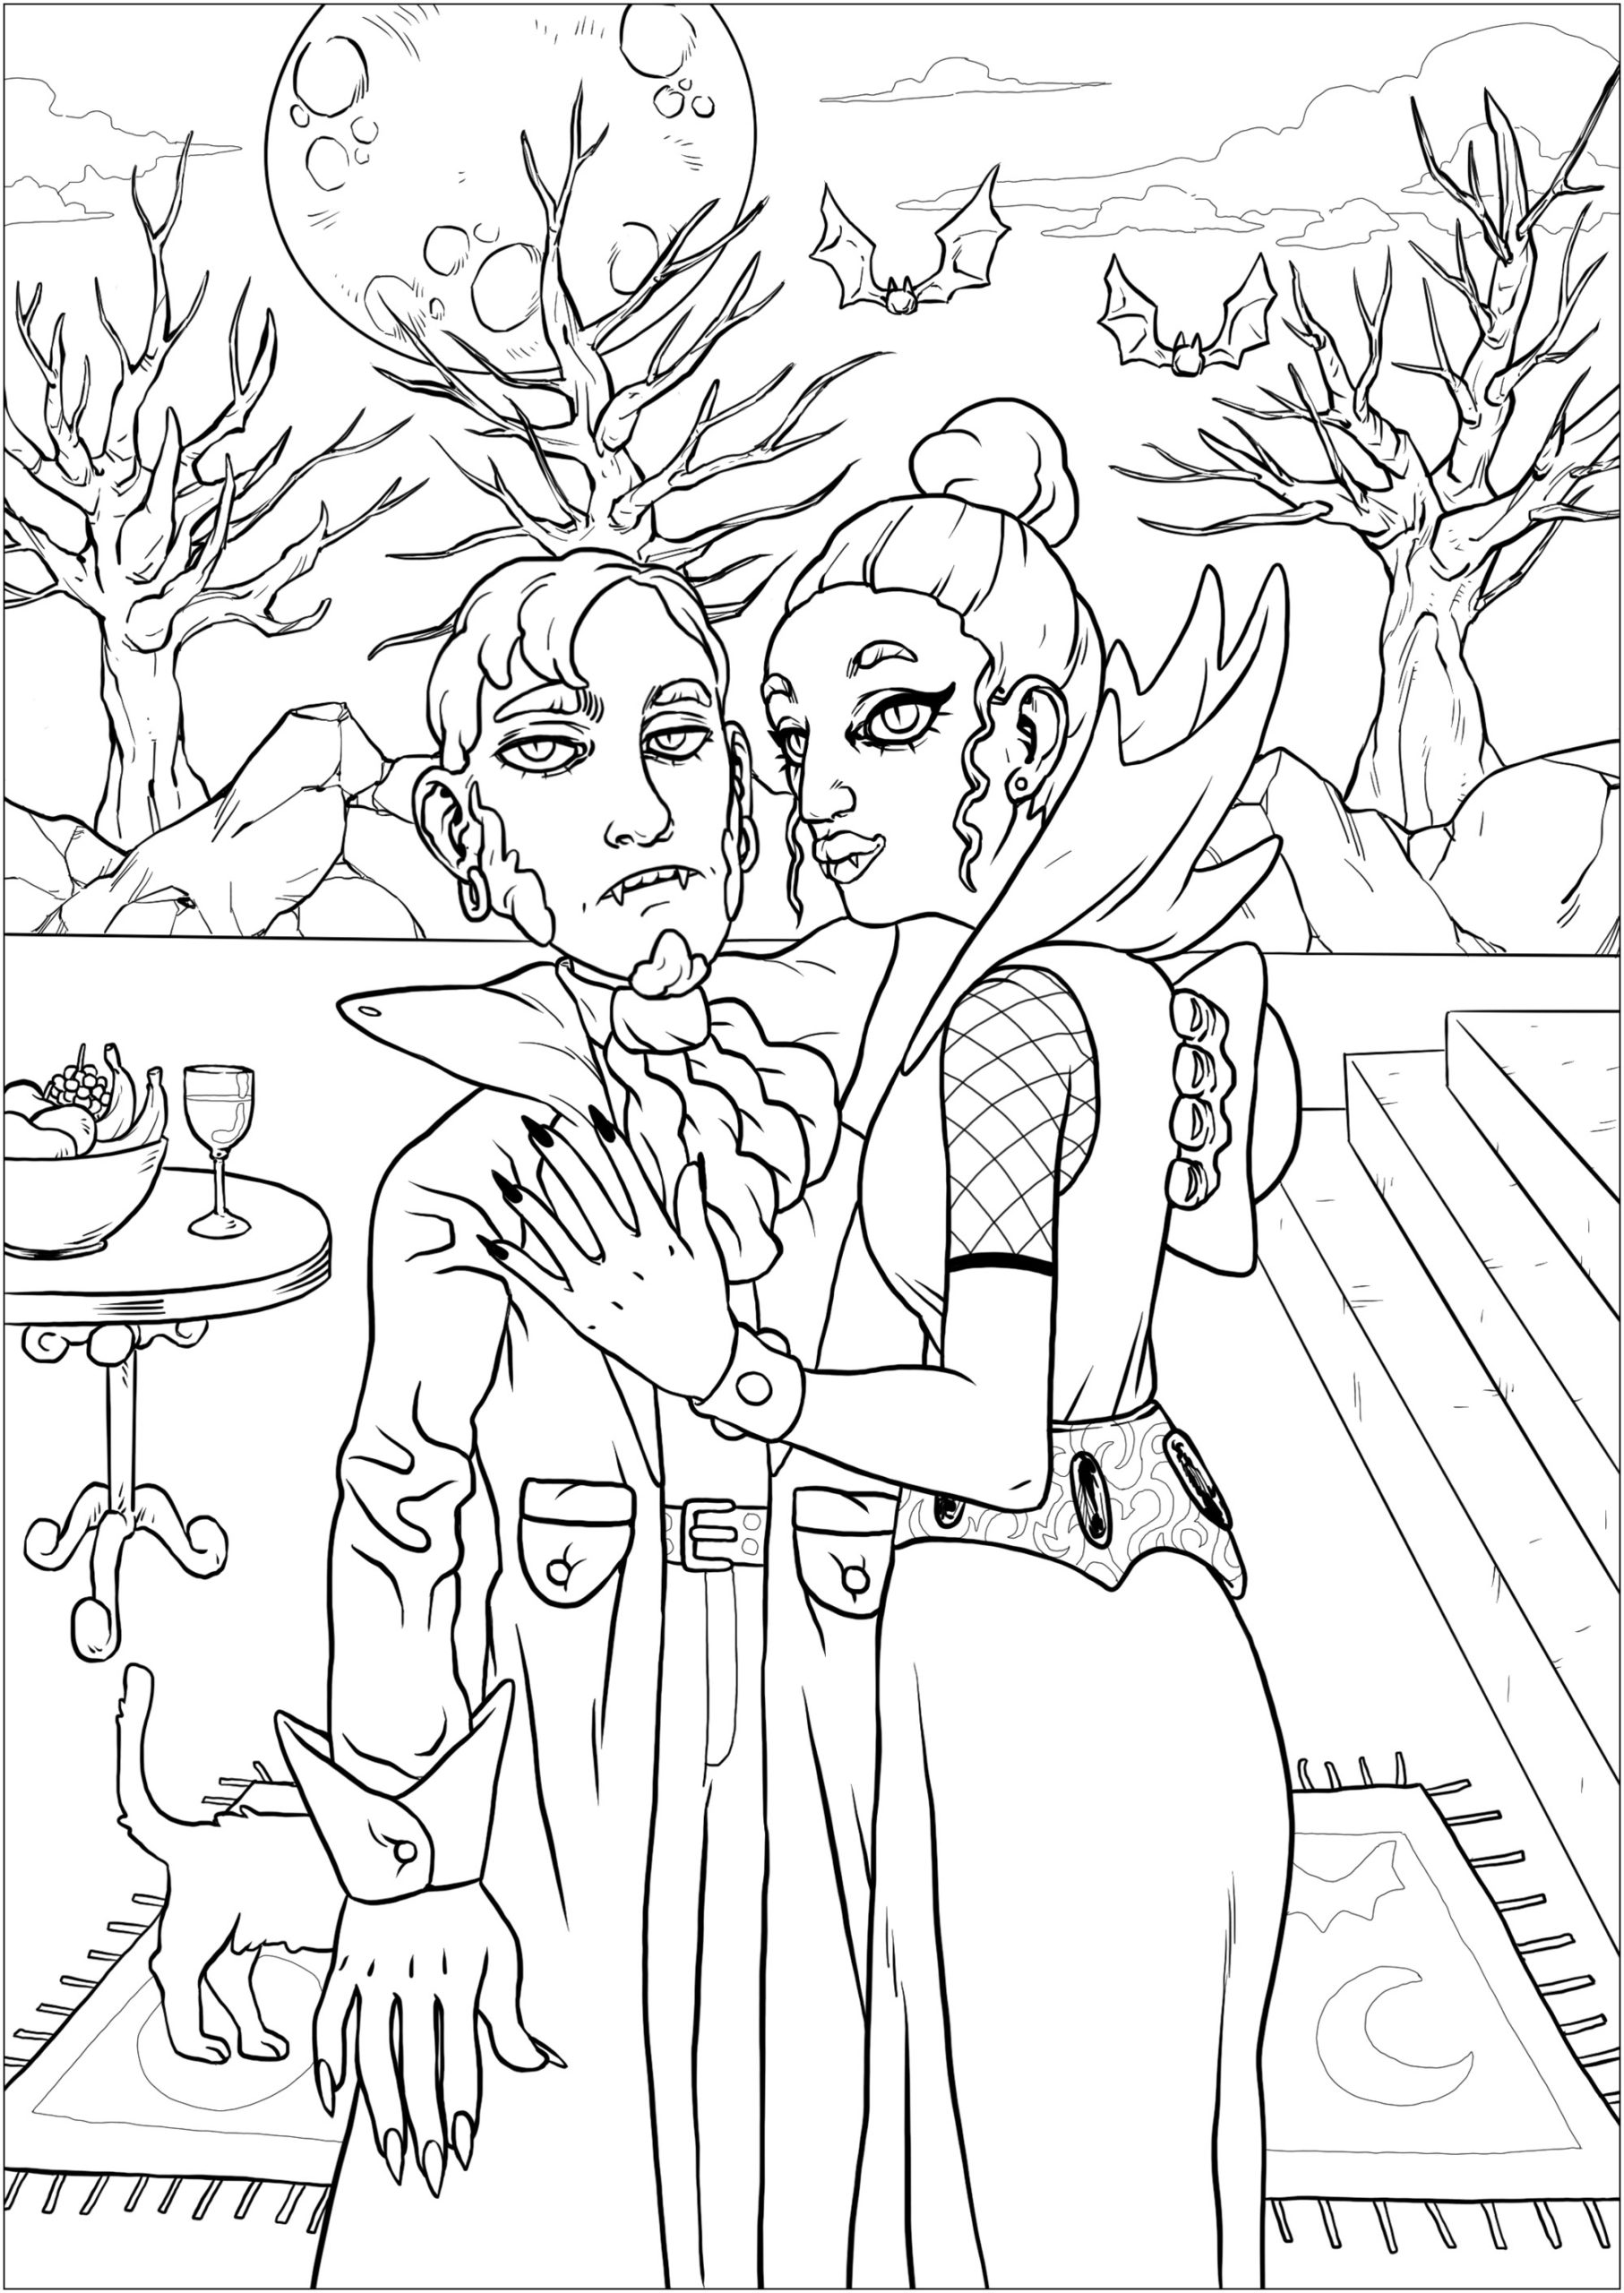 Vampire Couple | top halloween coloring pages for adults | halloween coloring pages for adults pdf